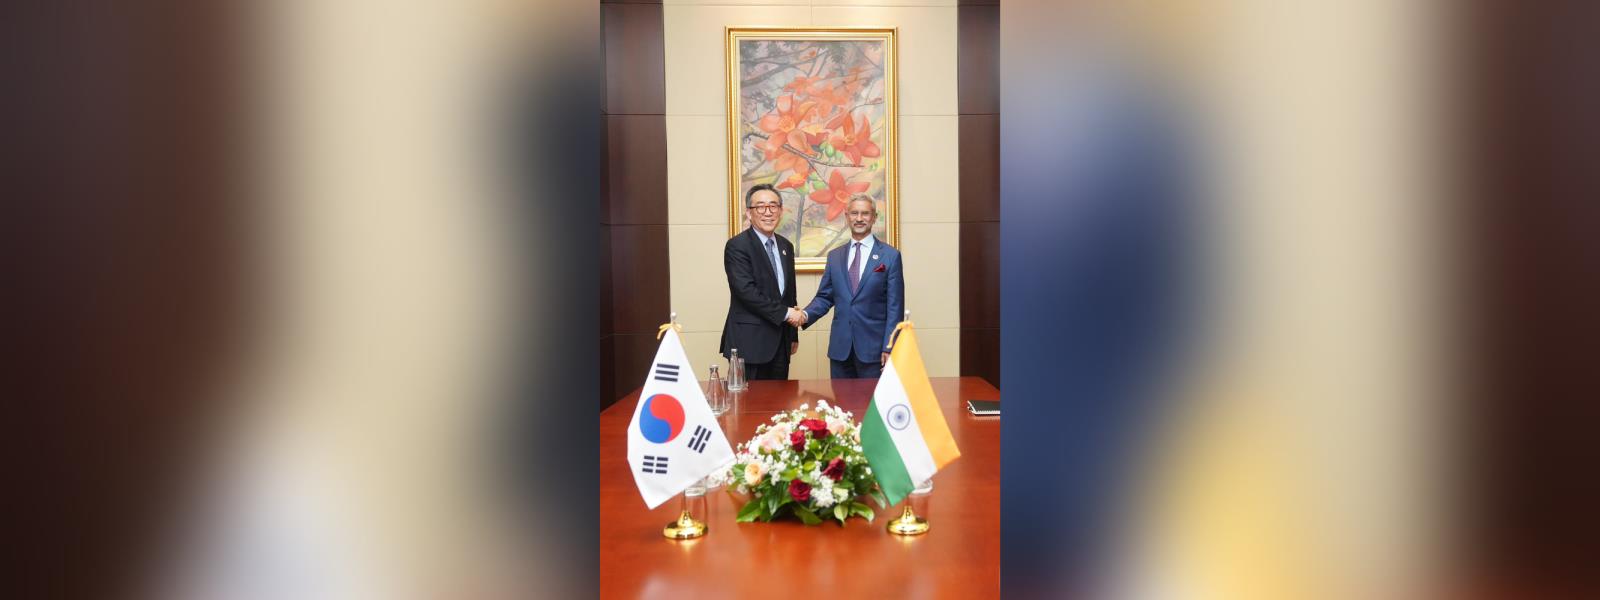 External Affairs Minister Dr. S. Jaishankar met H.E. Mr. Cho Tae-yul, Foreign Minister of South Korea on the sidelines of ASEAN meetings in Vientiane